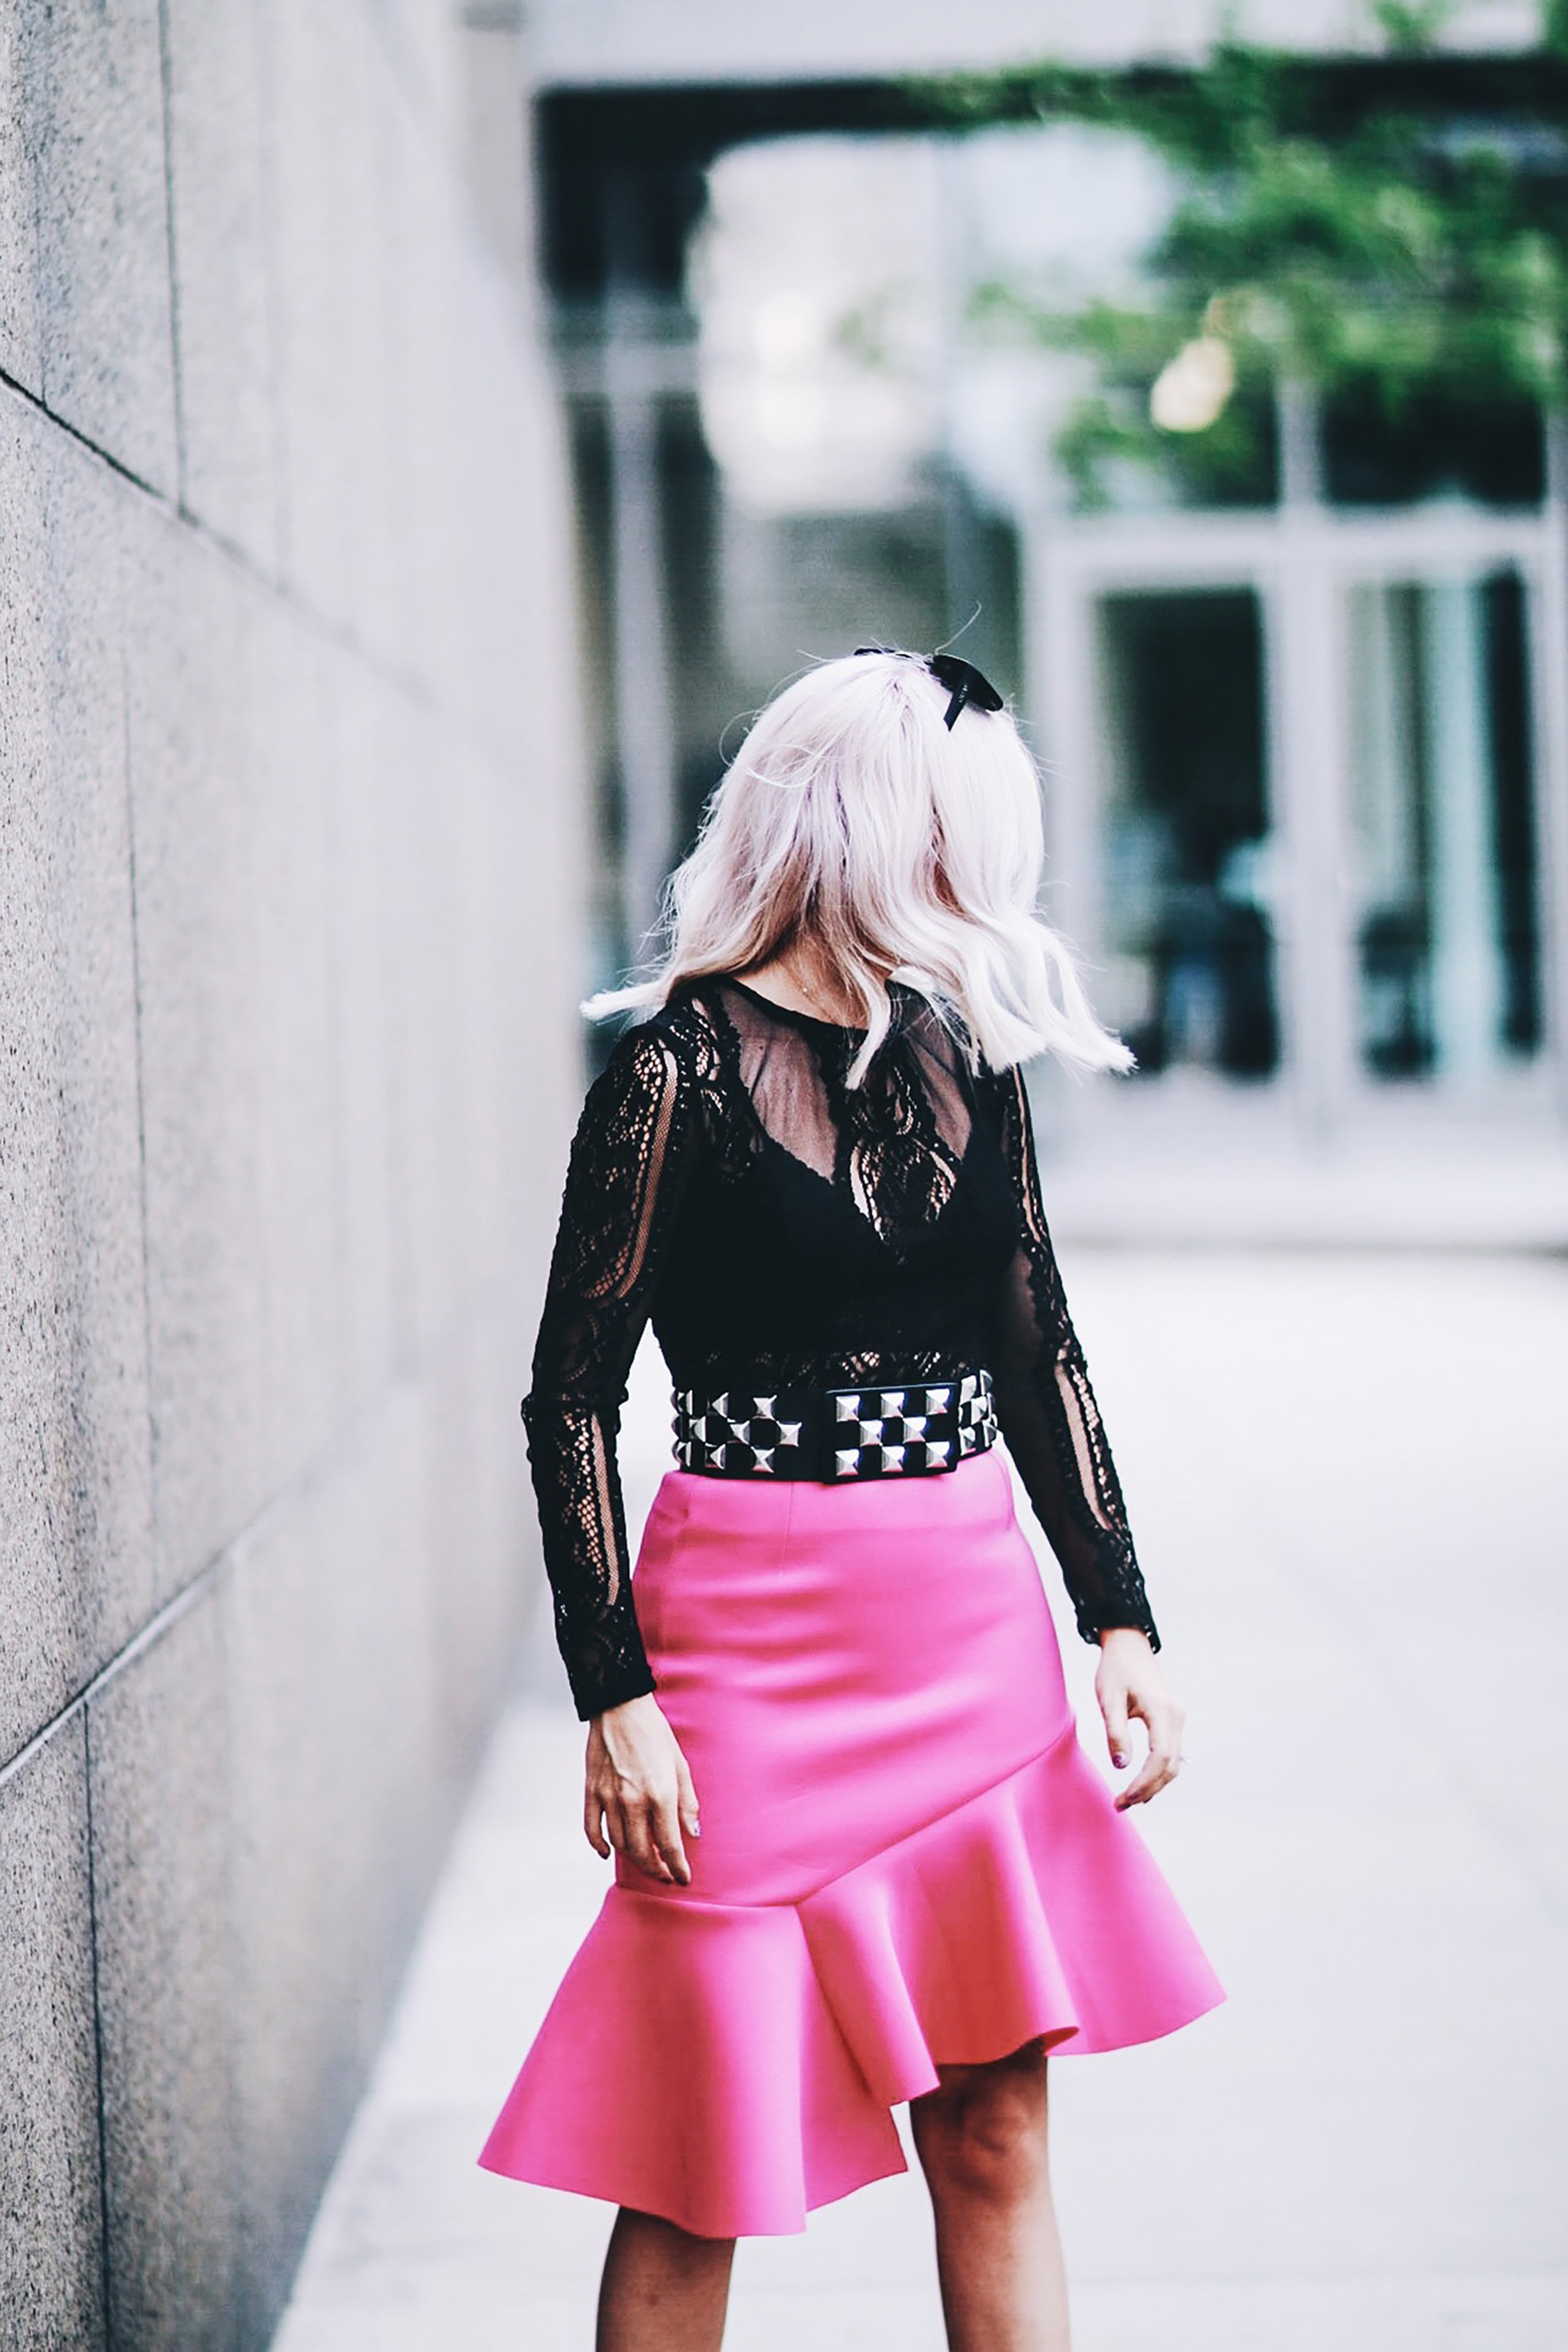 Alena Gidenko of modaprints.com styles a hot pink skirt with a long sleeve lace top, studded belt and black heels